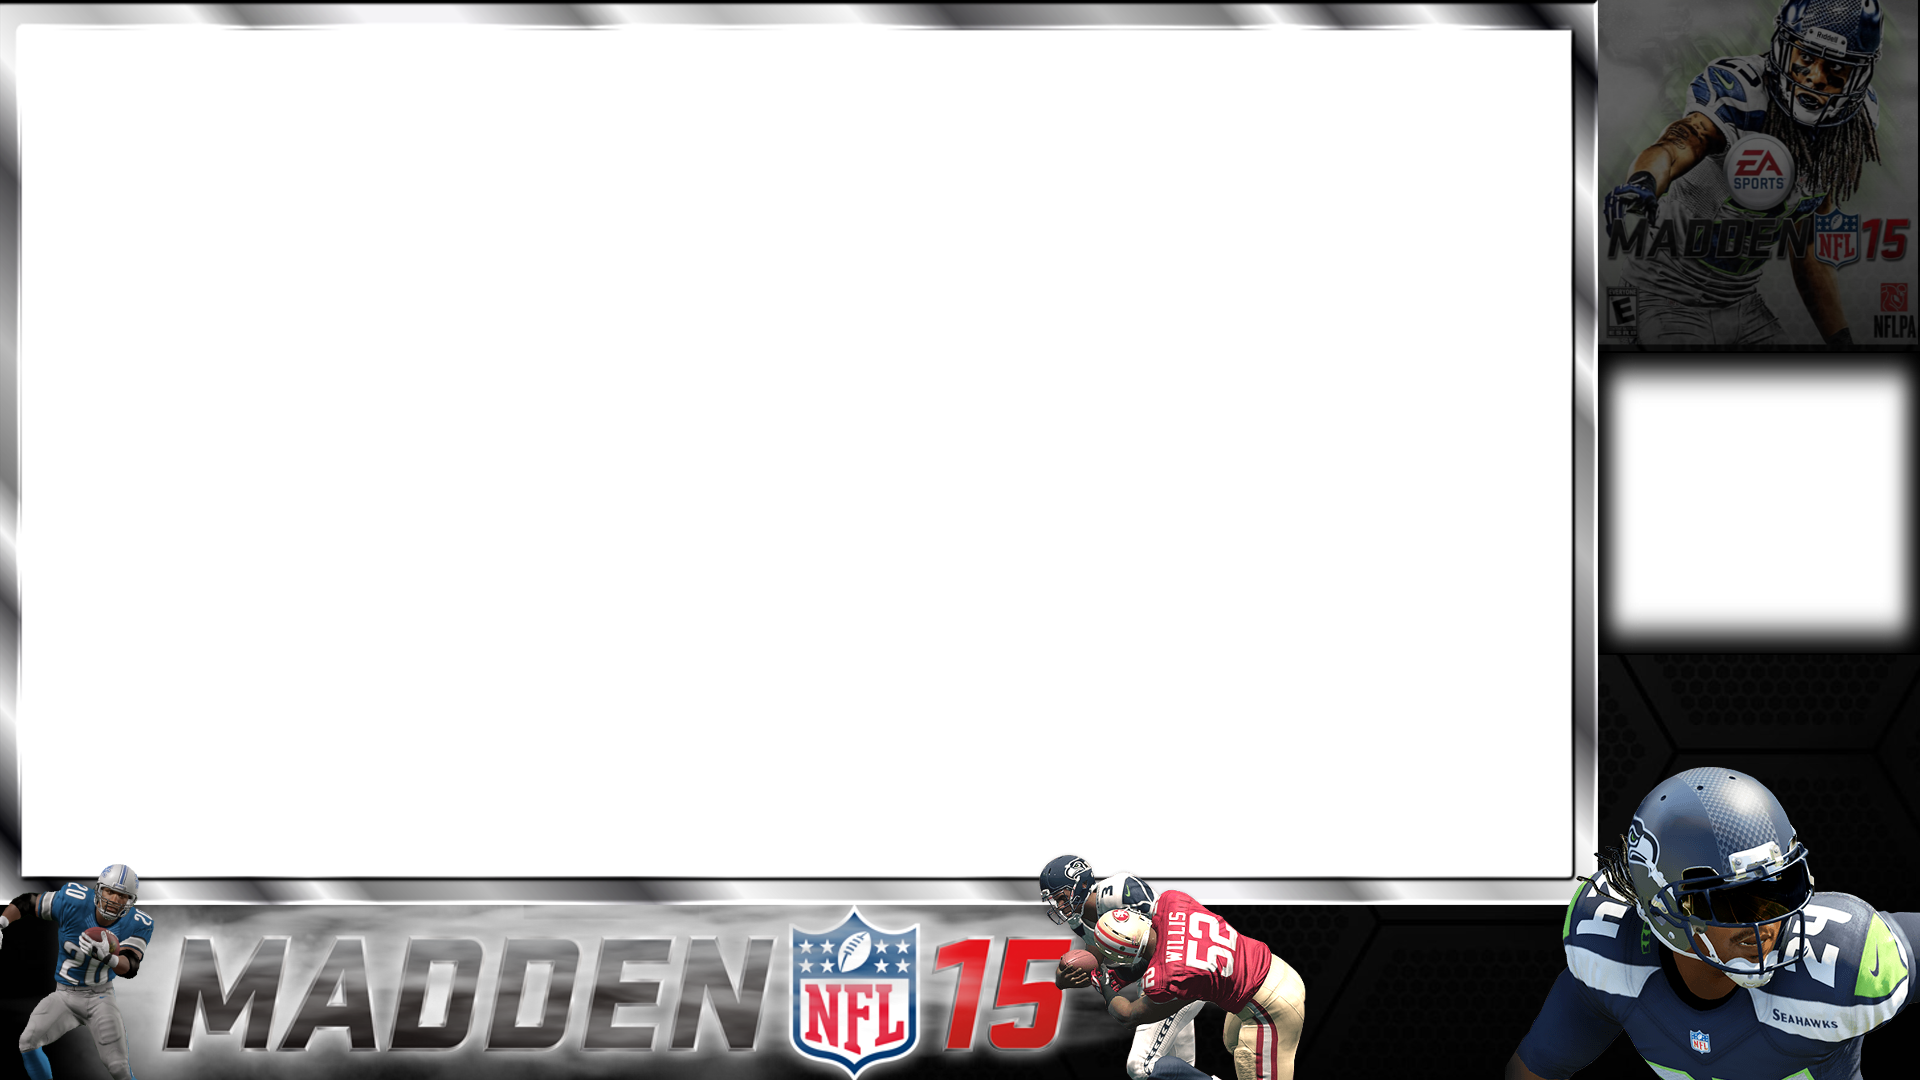 Download Madden 15 Twitch Overlay Madden Nfl 15 Playstation 4 Ps4 Png Image With No Background Pngkey Com